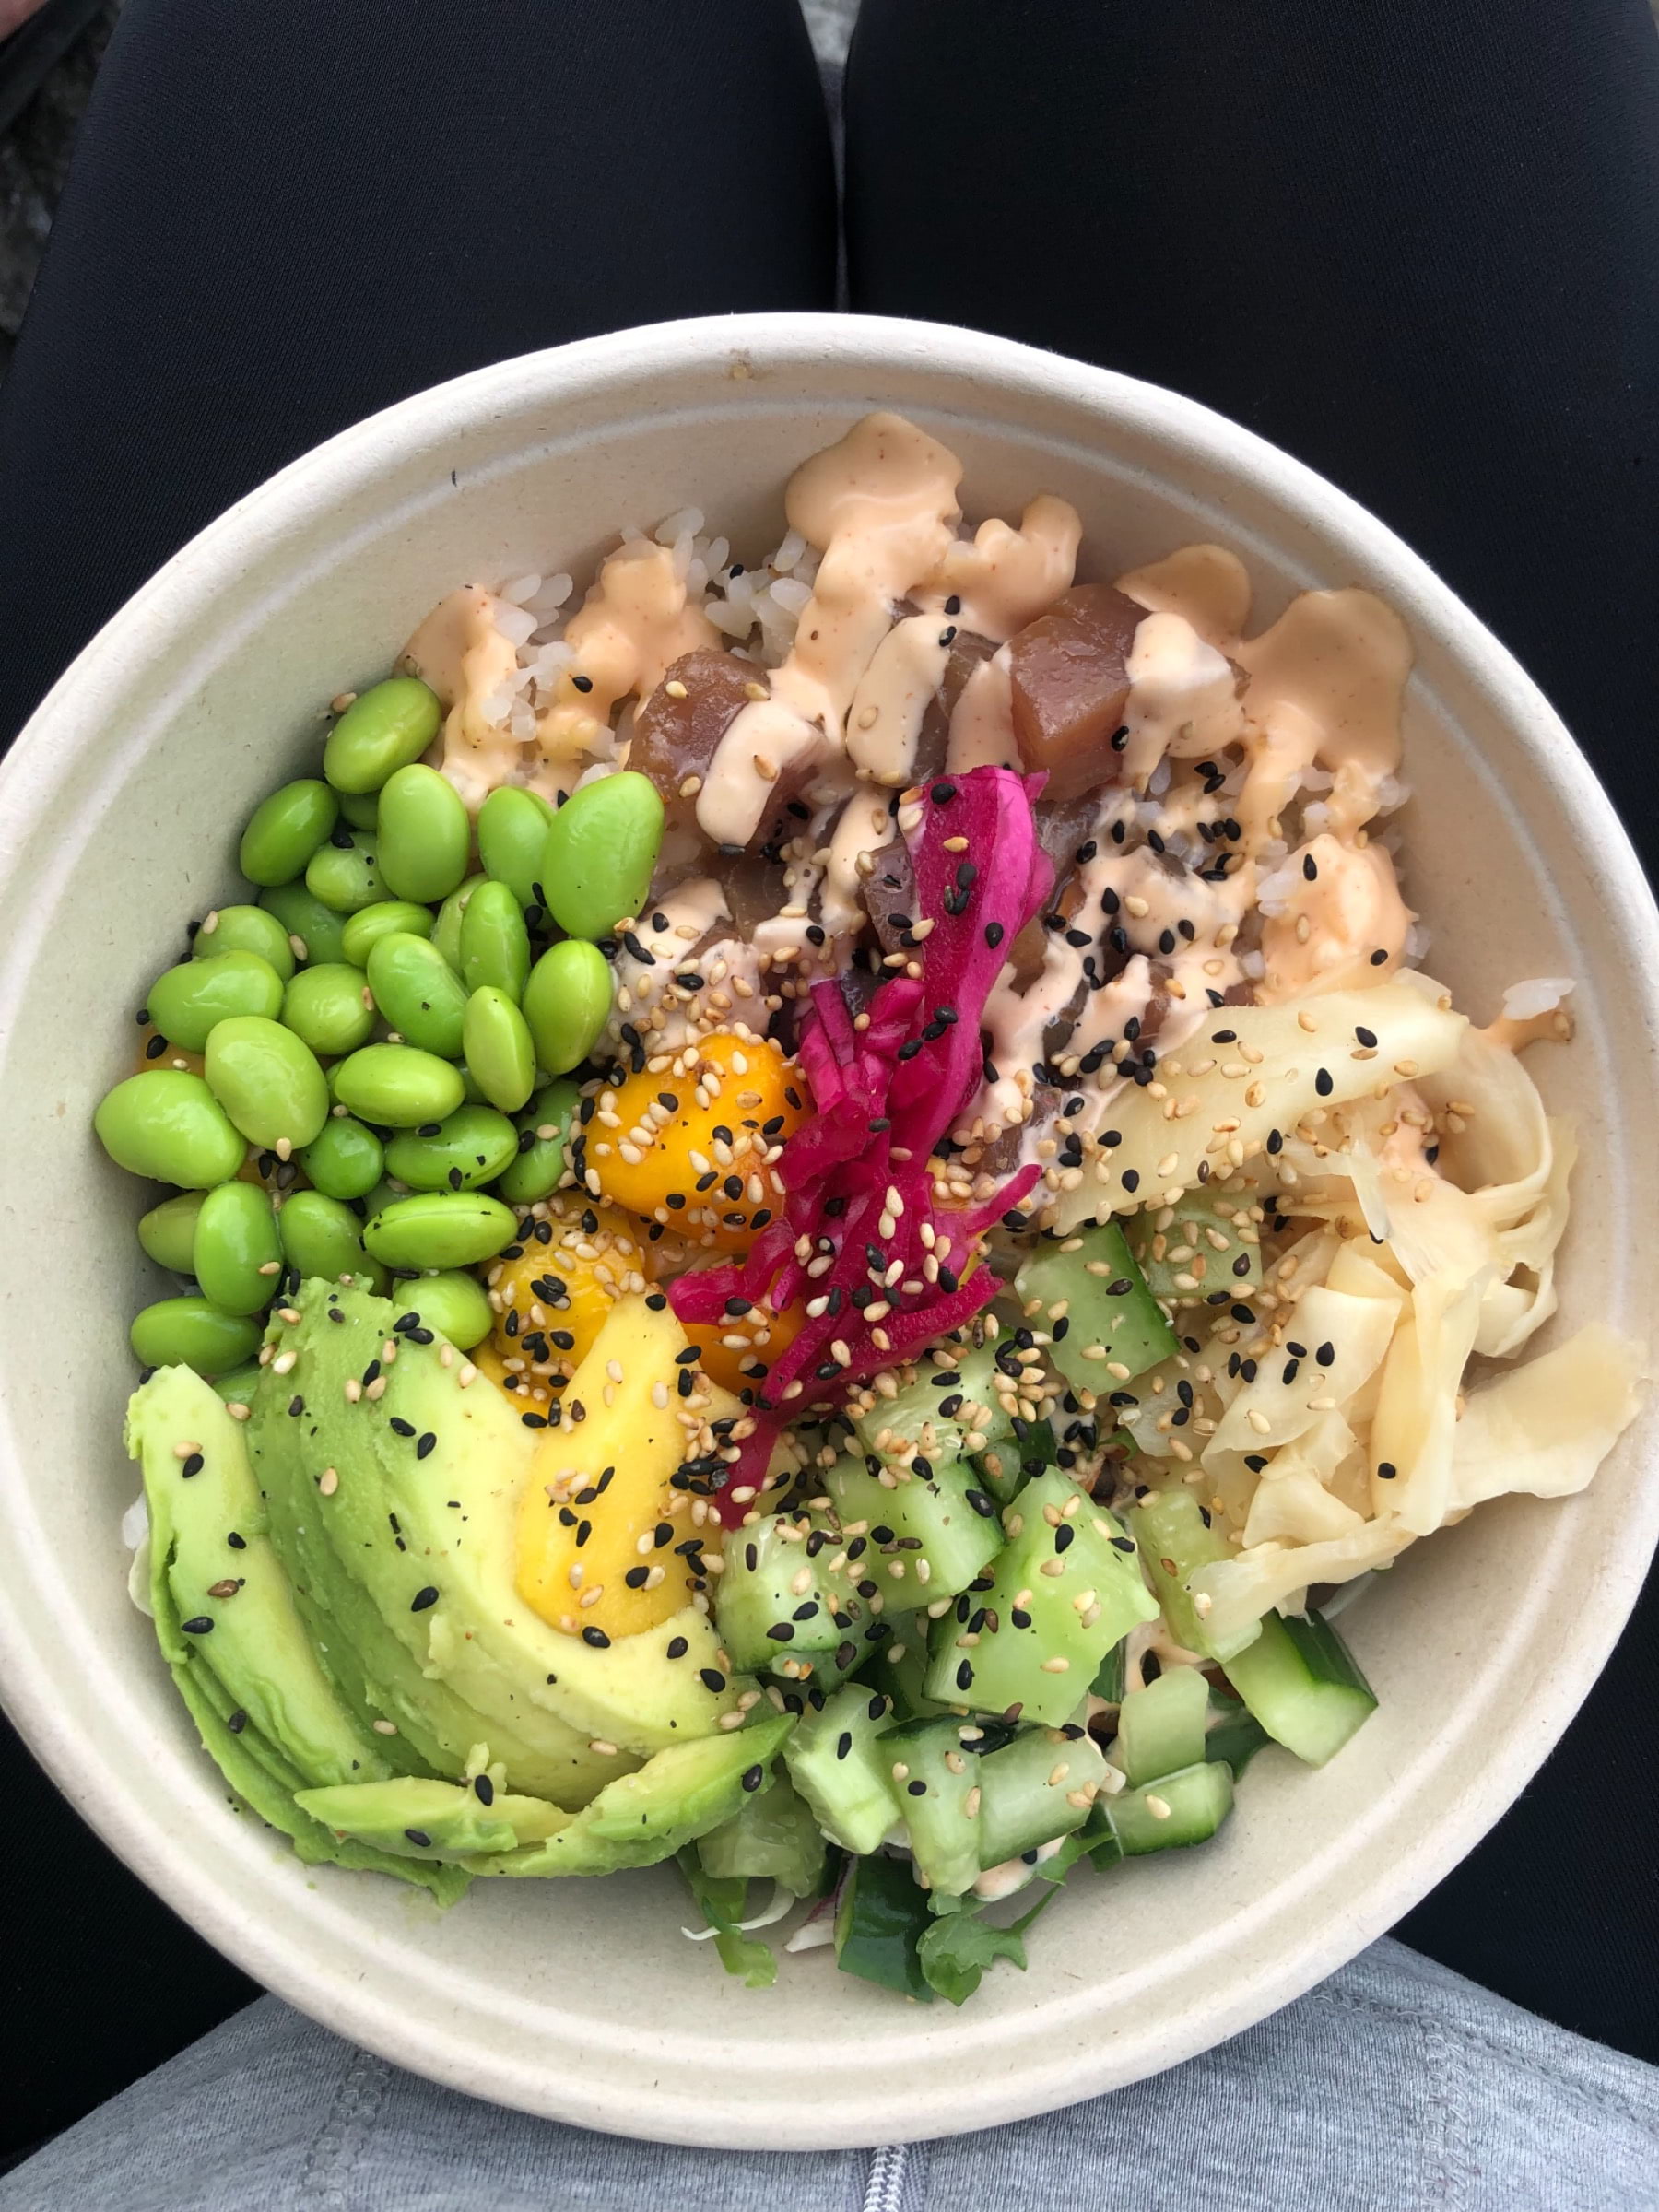 Photo from Hawaii Poké Lindhagen by Mimmi S. (12/06/2021)